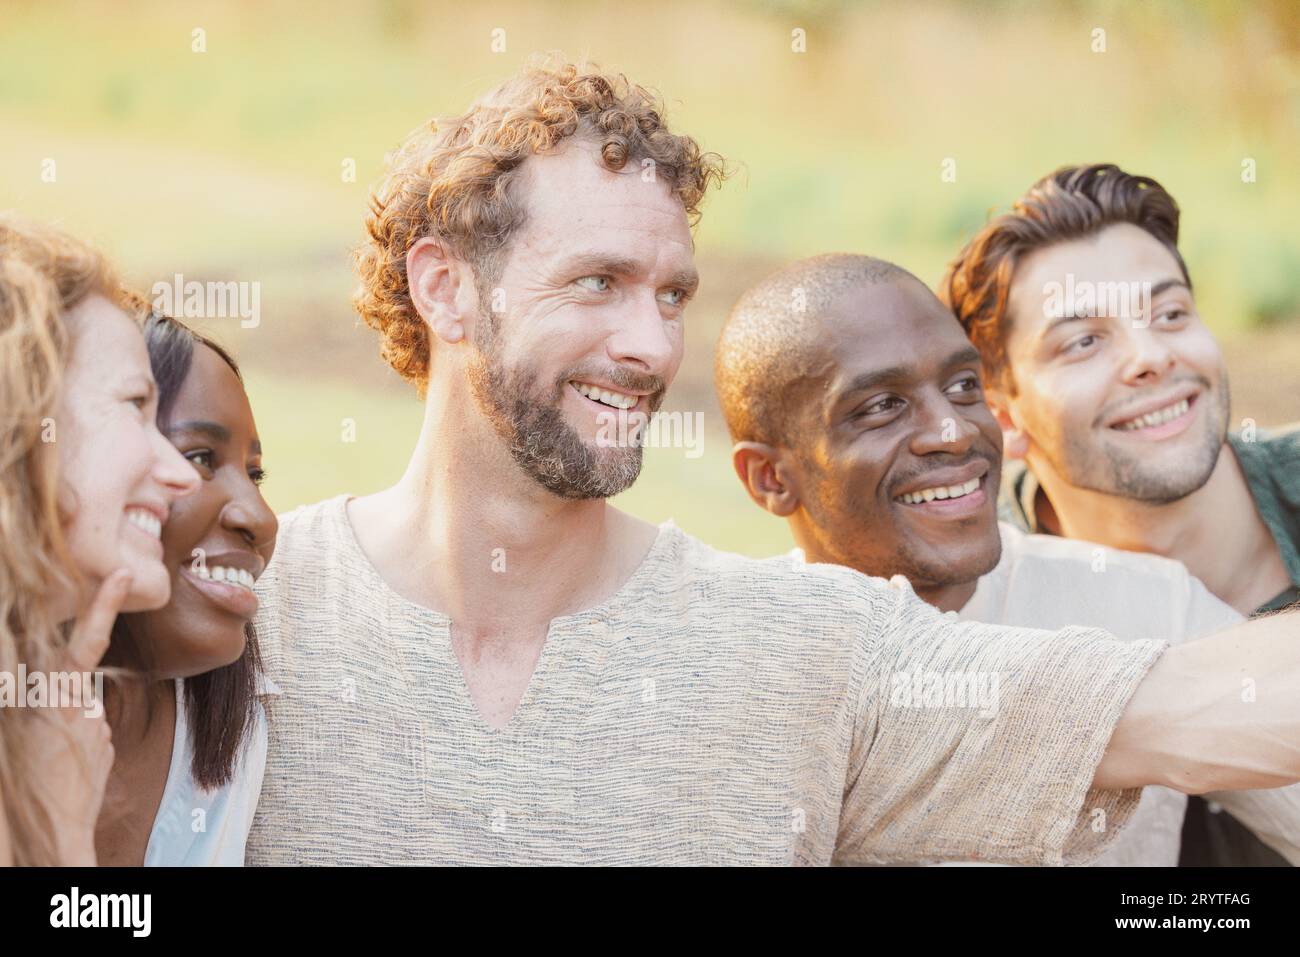 Multiracial group of young happy people smiling and taking selfie photo while walking outside in summertime Stock Photo